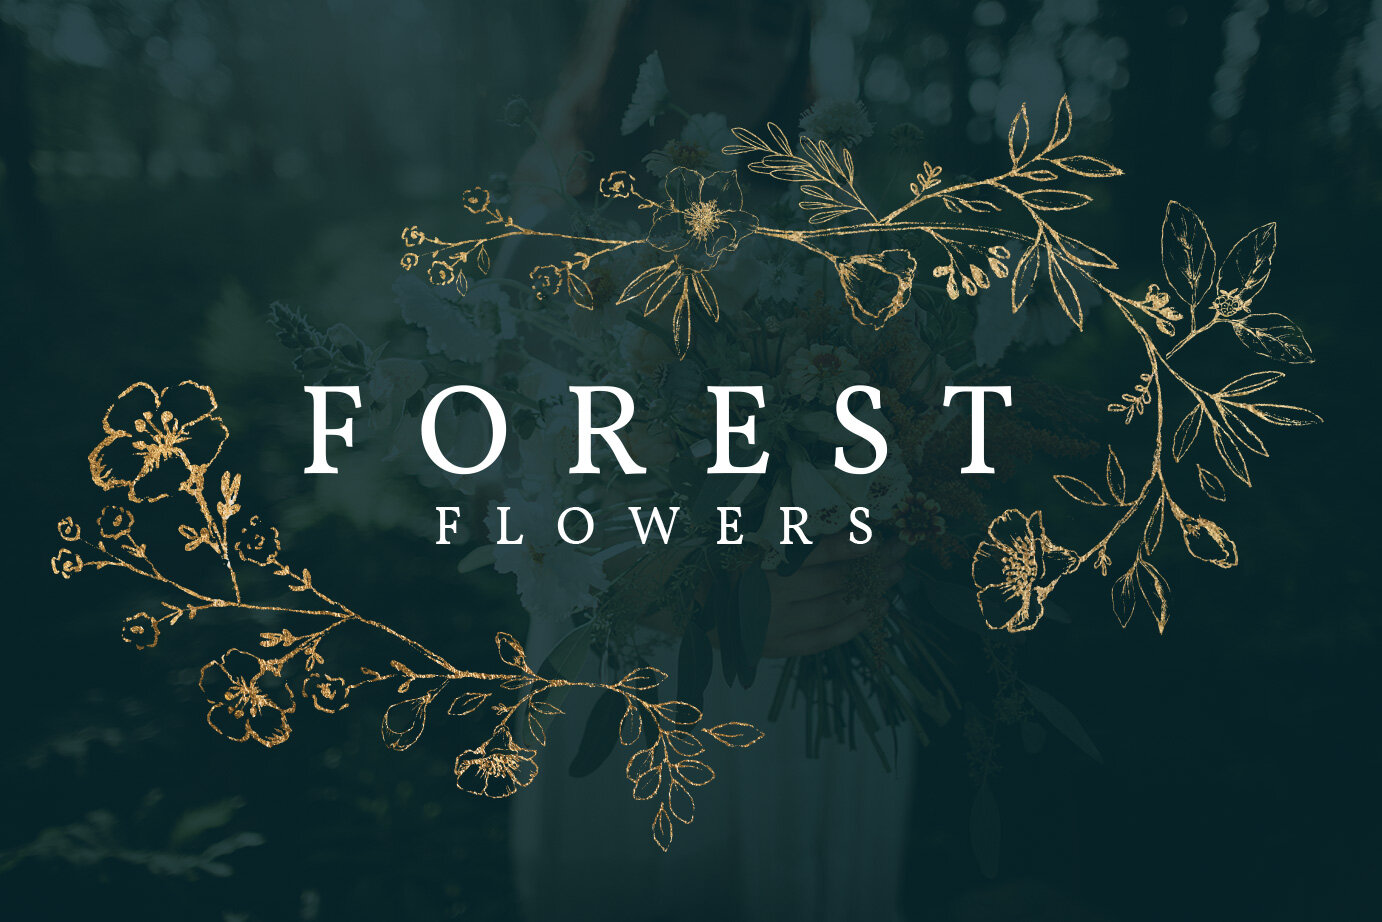 FOREST FLOWERS